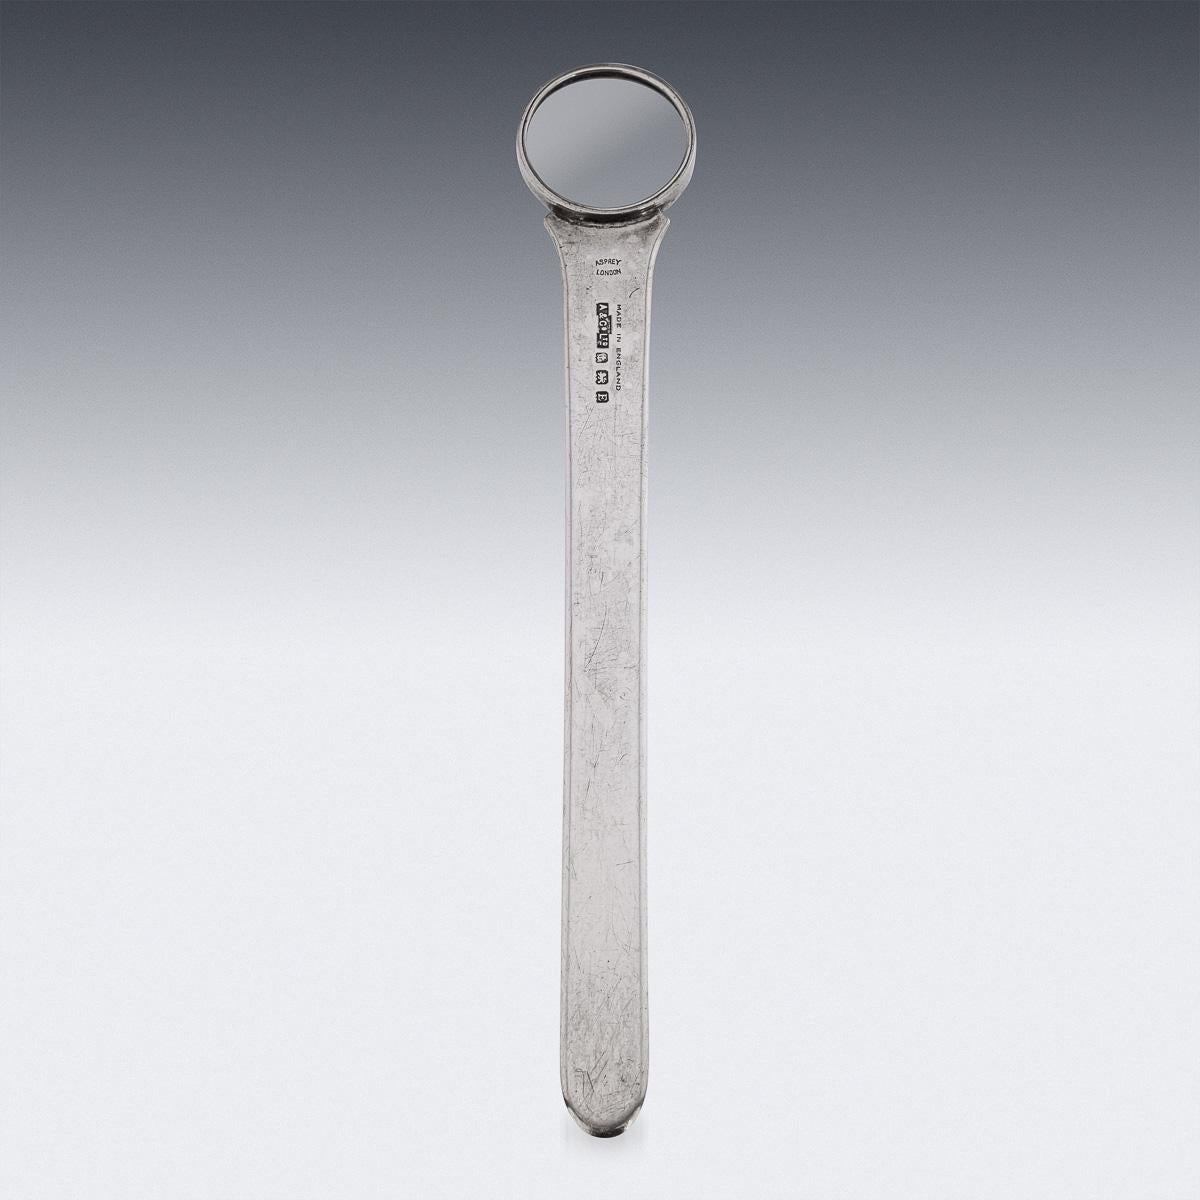 Antique early-20th Century British solid silver magnifying glass & ruler, with engraved silver mounts and a handle terminating with a finger loop. Hallmarked English silver (925 standard), Birmingham, year 1929 (E), Maker A&CoLtd (Asprey & Co Ltd).